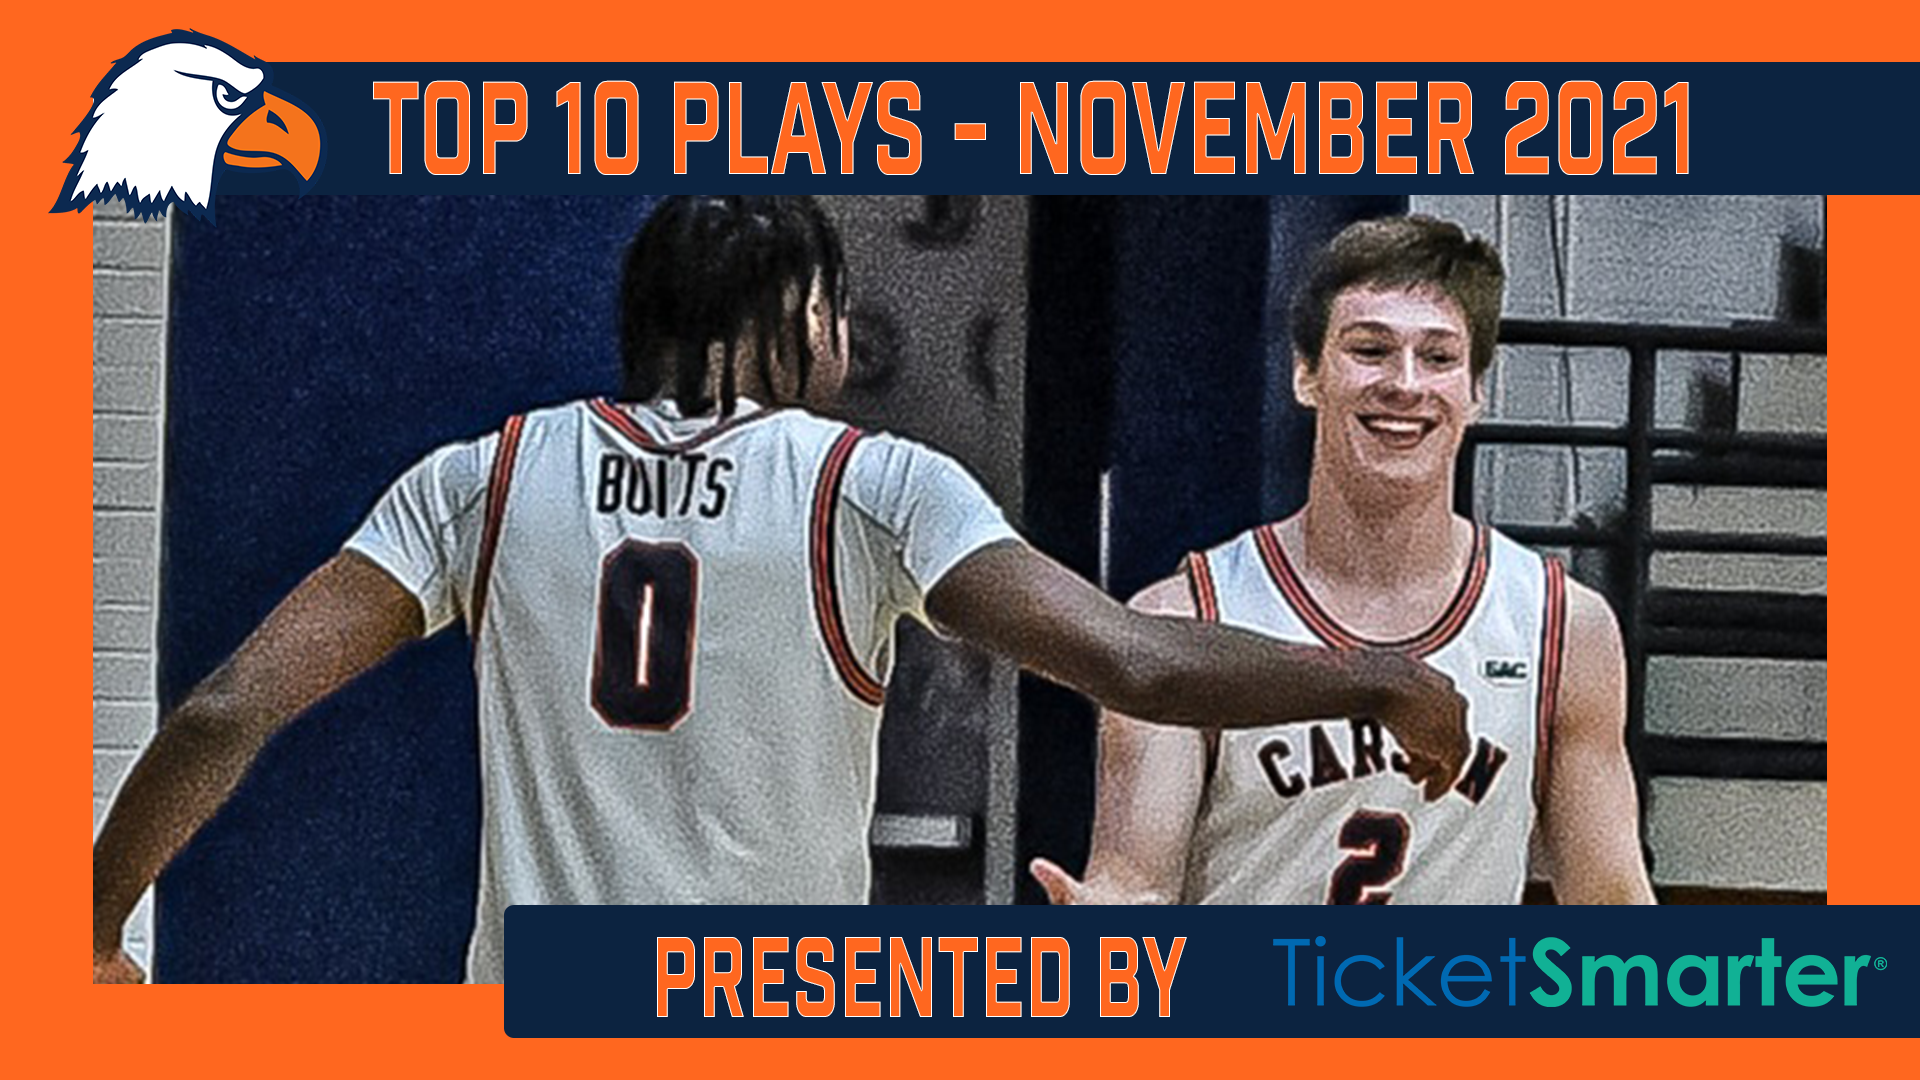 Eagle Sports Network releases Ticketsmarter top ten plays for the month of November